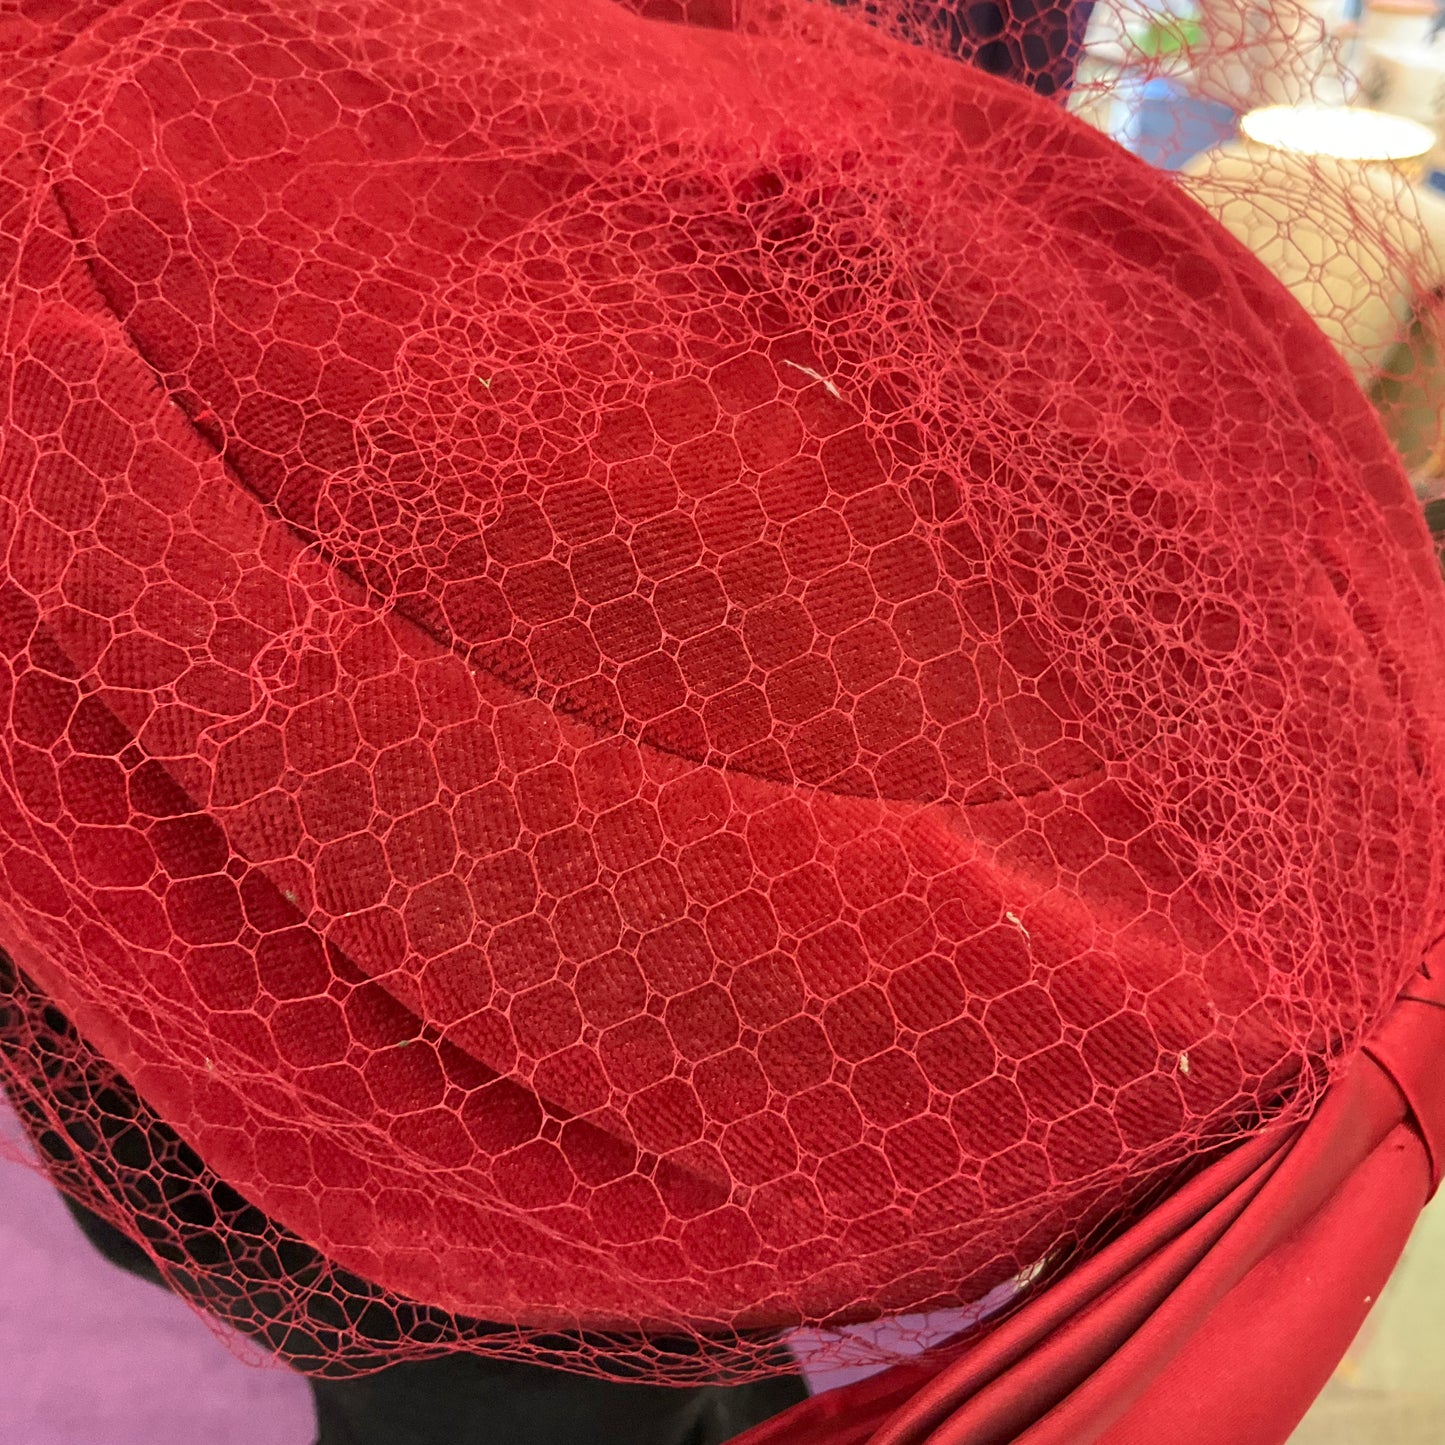 Vintage 1980s Red Velvet pill box Hat with net veil and satin bow. Wedding